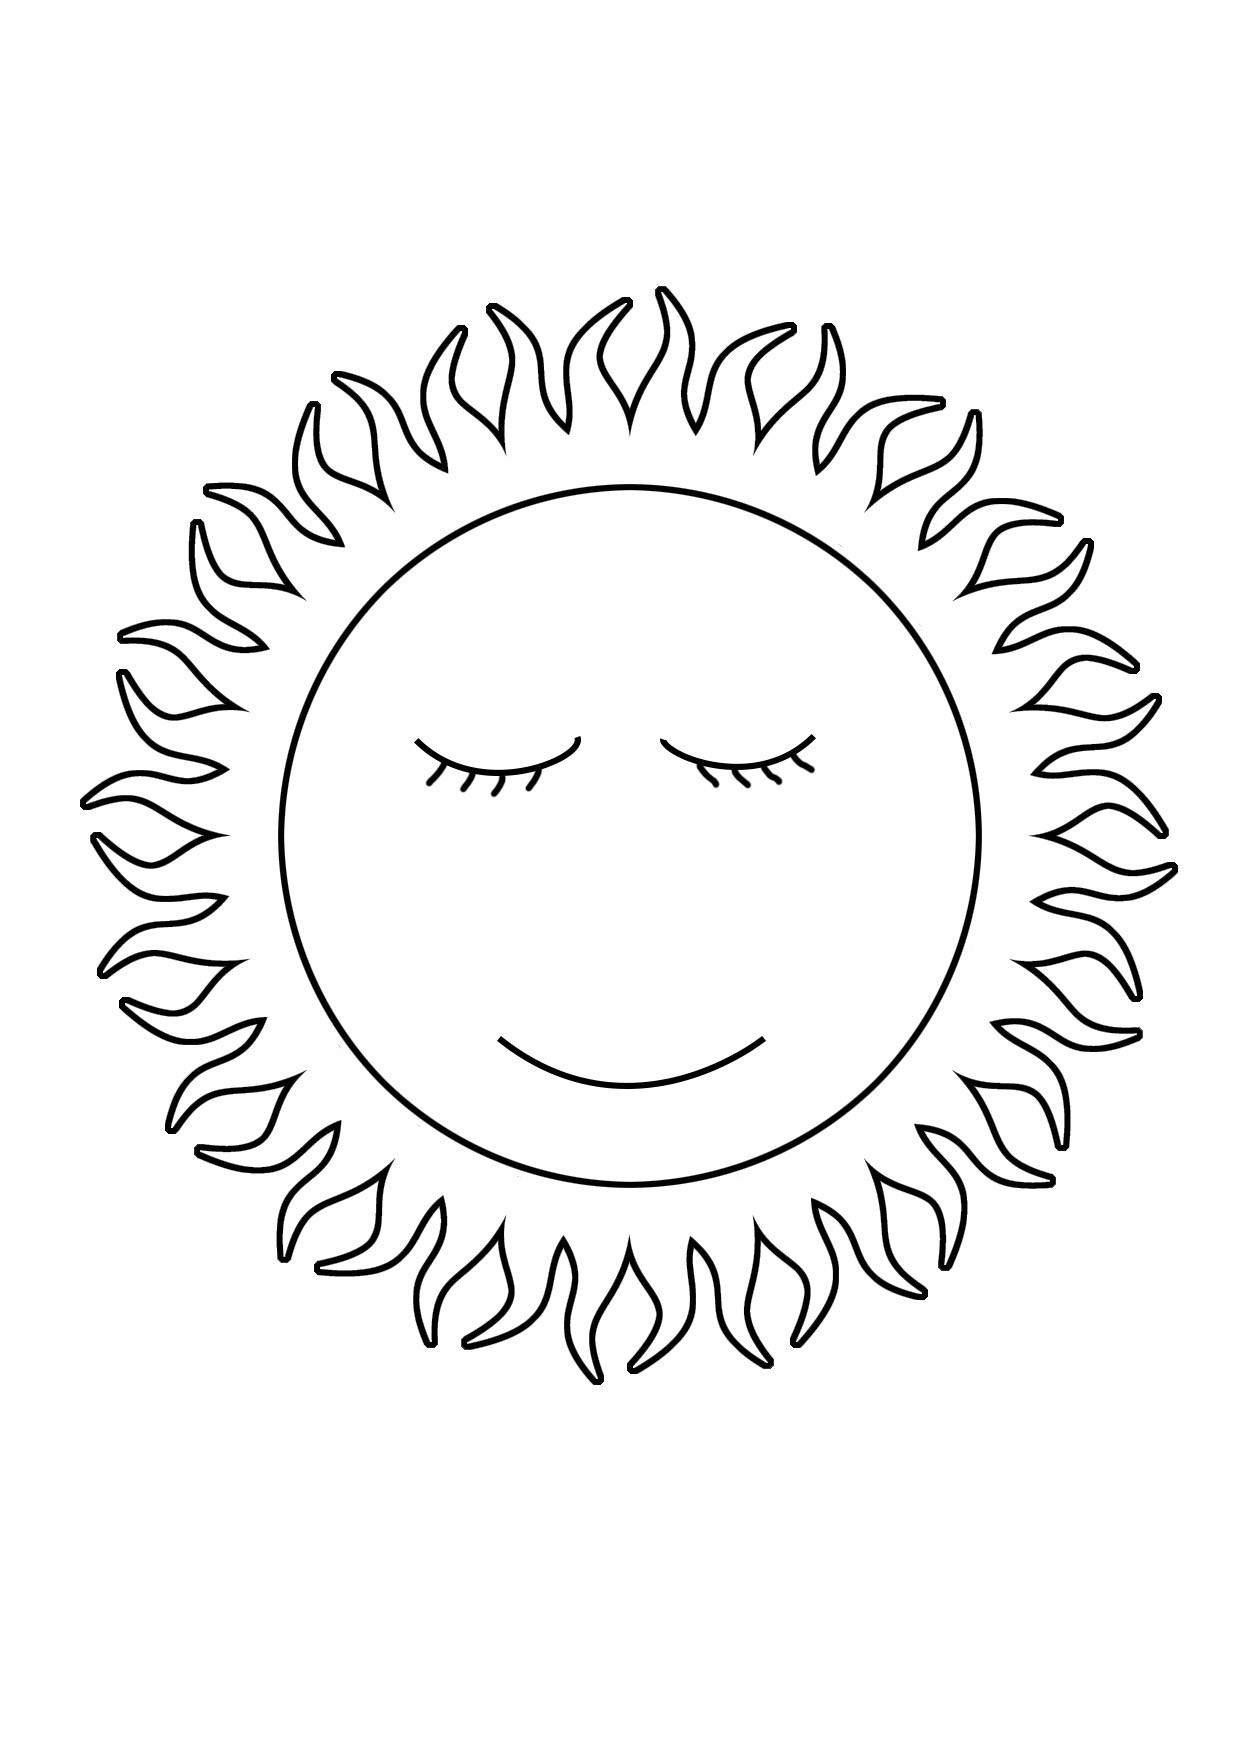 Sun Coloring Pages For Toddlers
 Summer Coloring Pages to Print